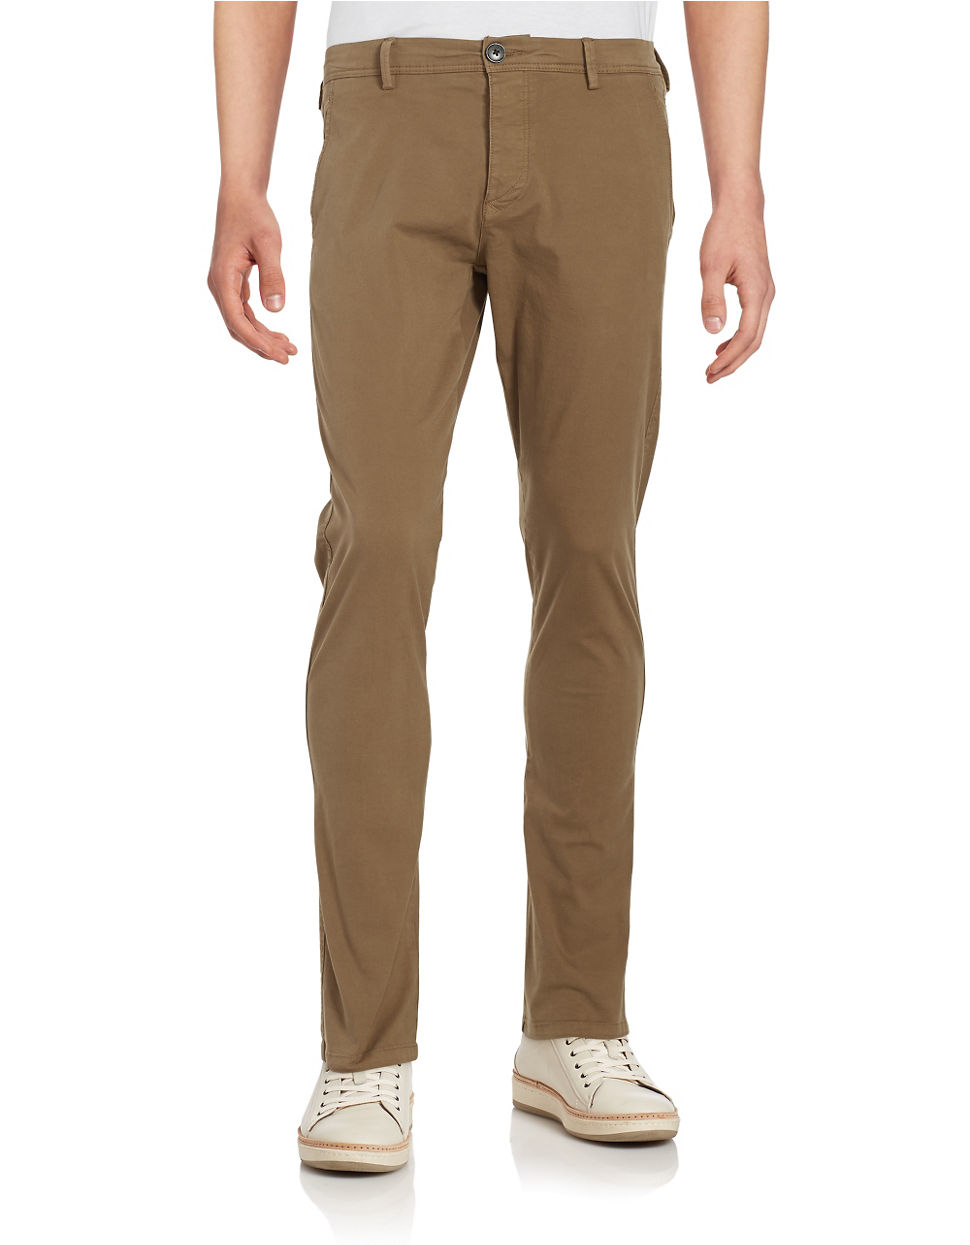 Selected Skinny Chino Pants in Natural for Men | Lyst